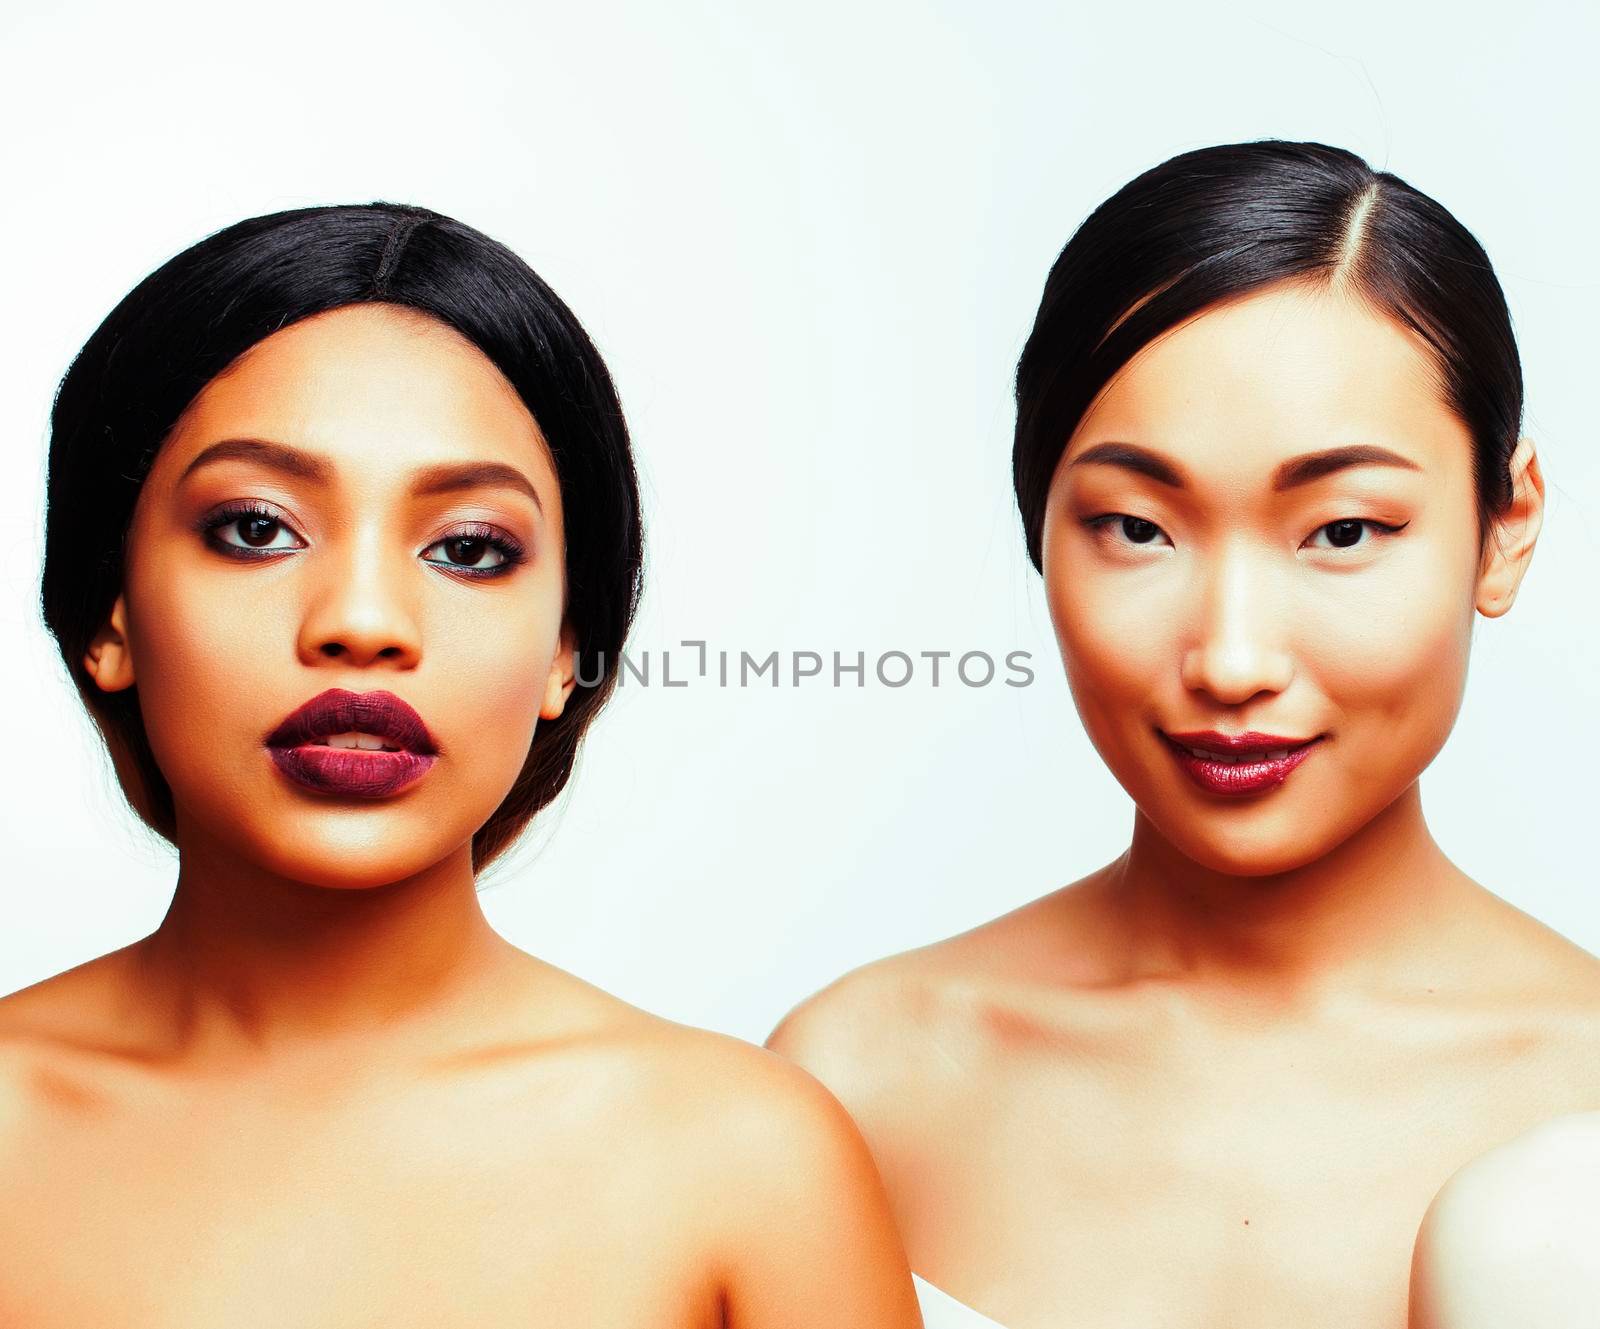 different nation woman: african-american and asian together isolated on white background happy smiling, diverse type on skin, lifestyle people concept by JordanJ